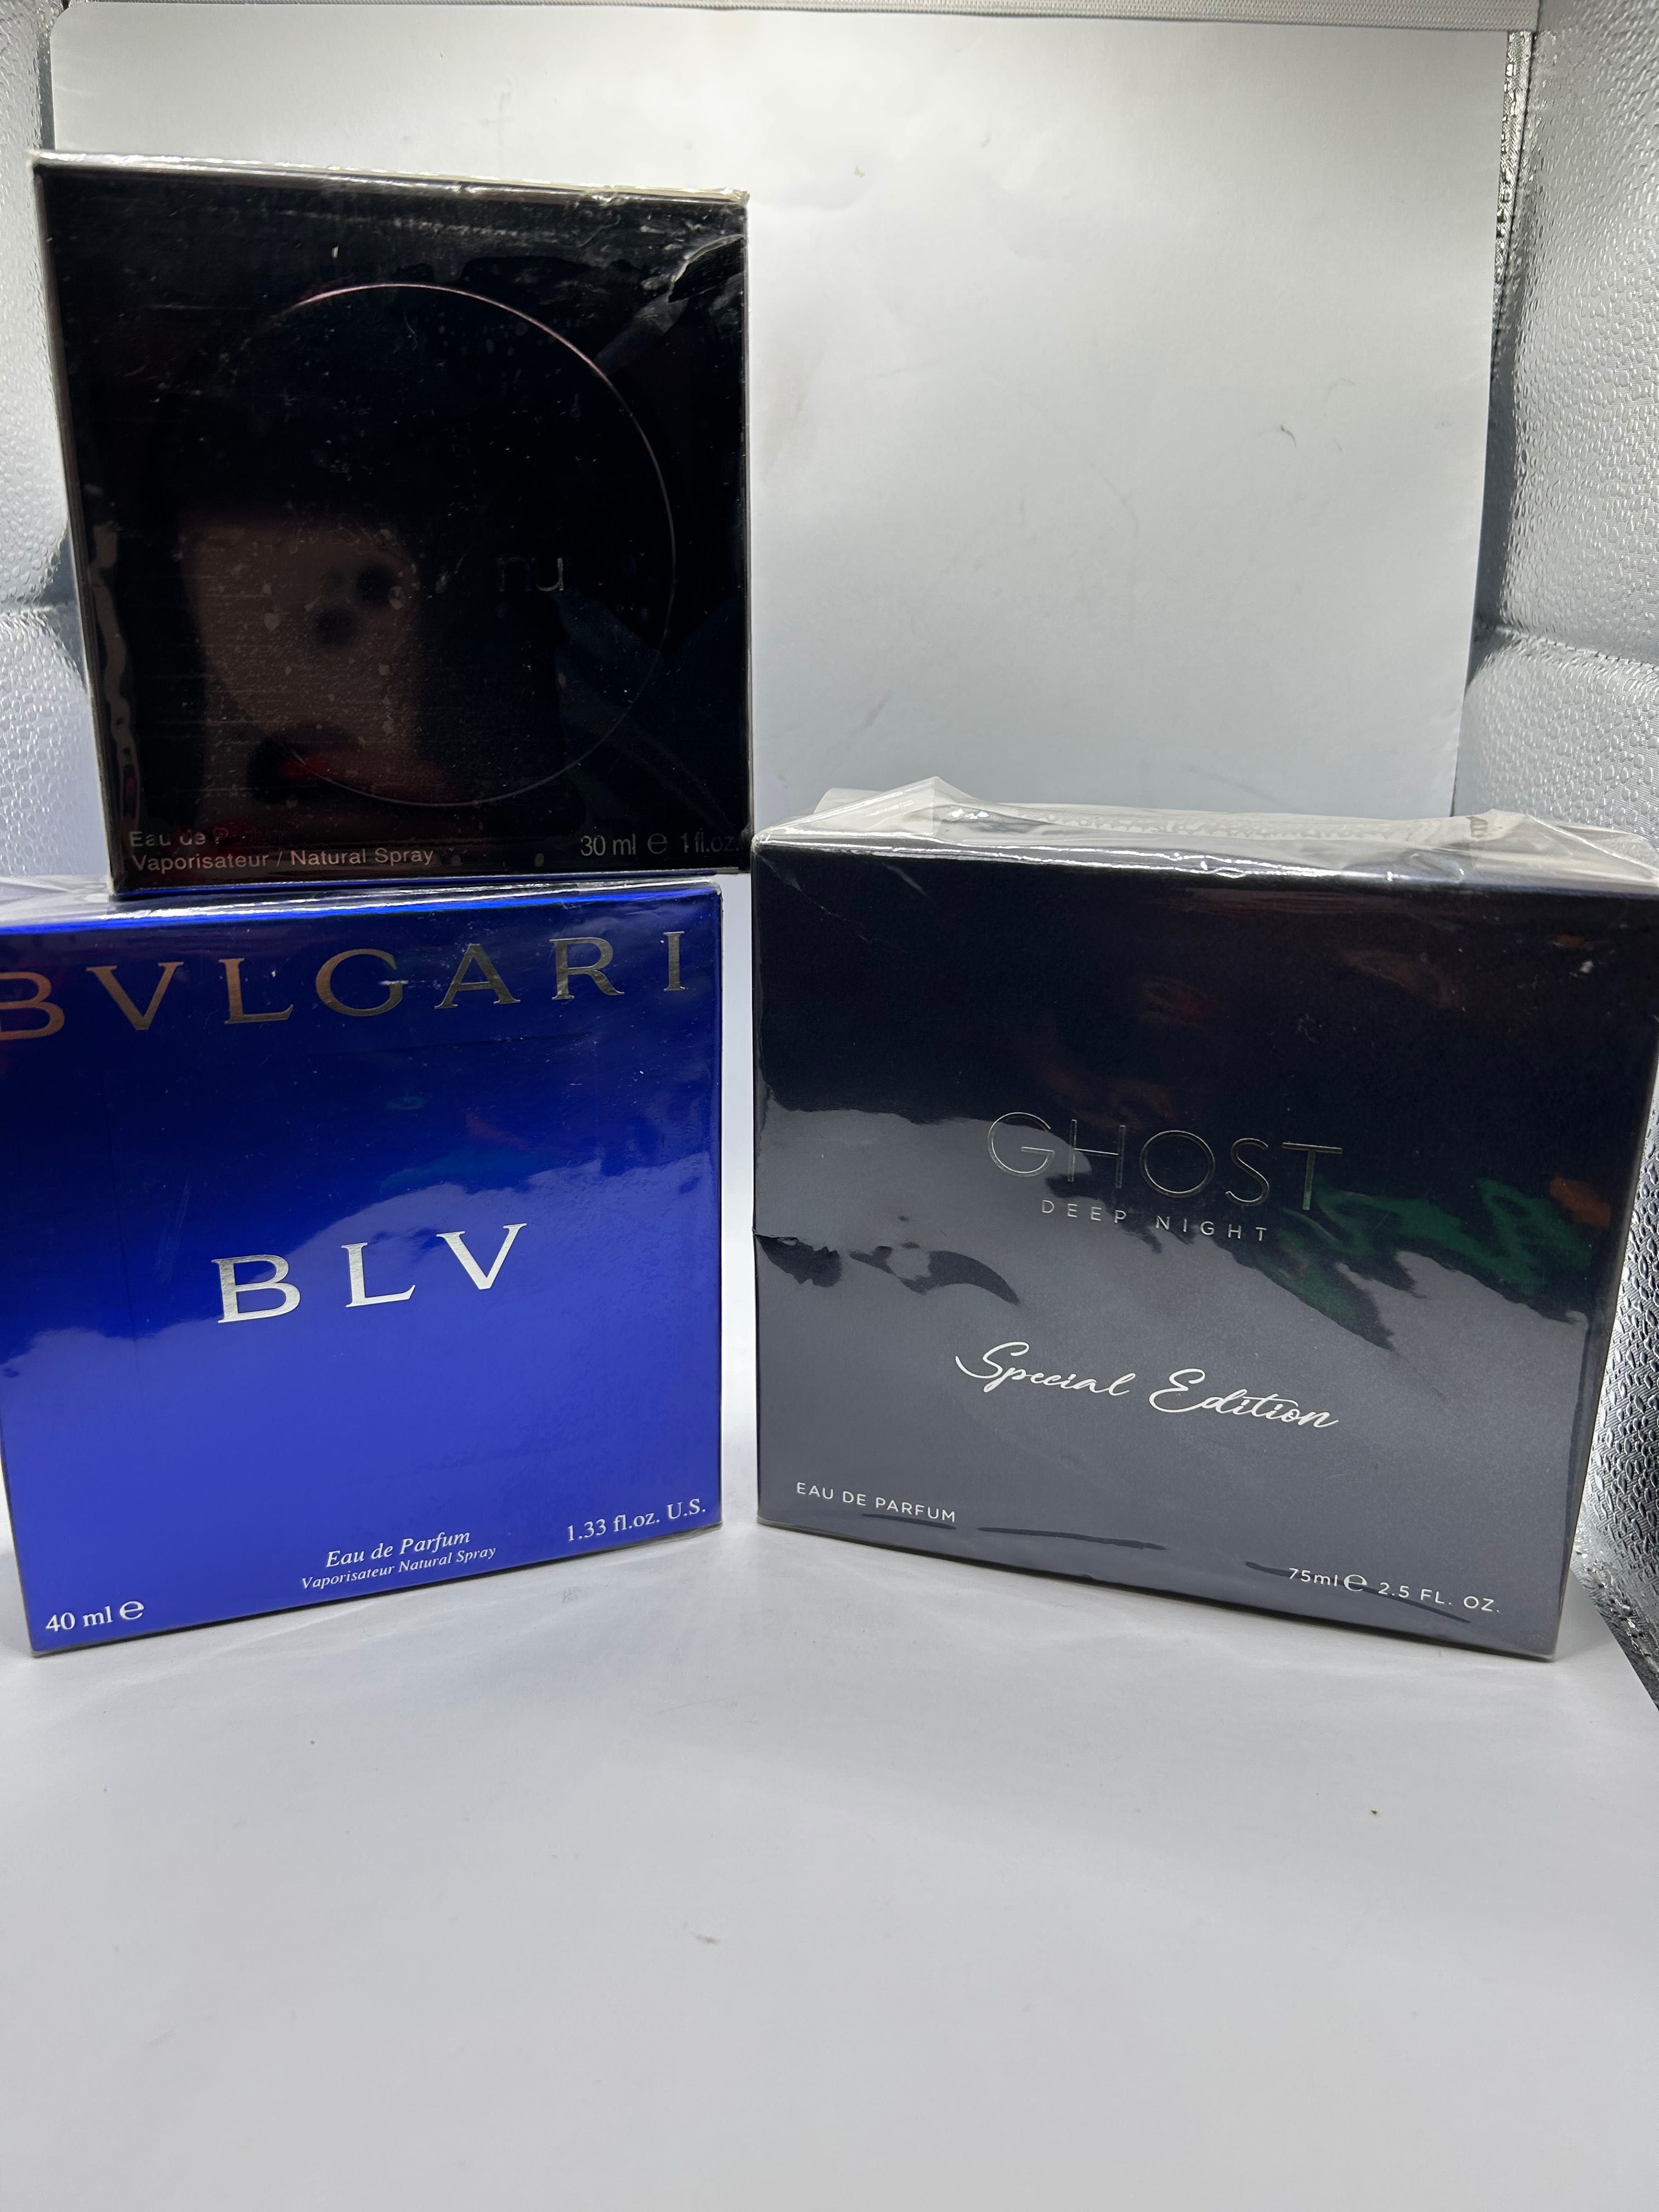 Yves Saint Laurent Nu ghost deep night special edition Bvlgari BLV